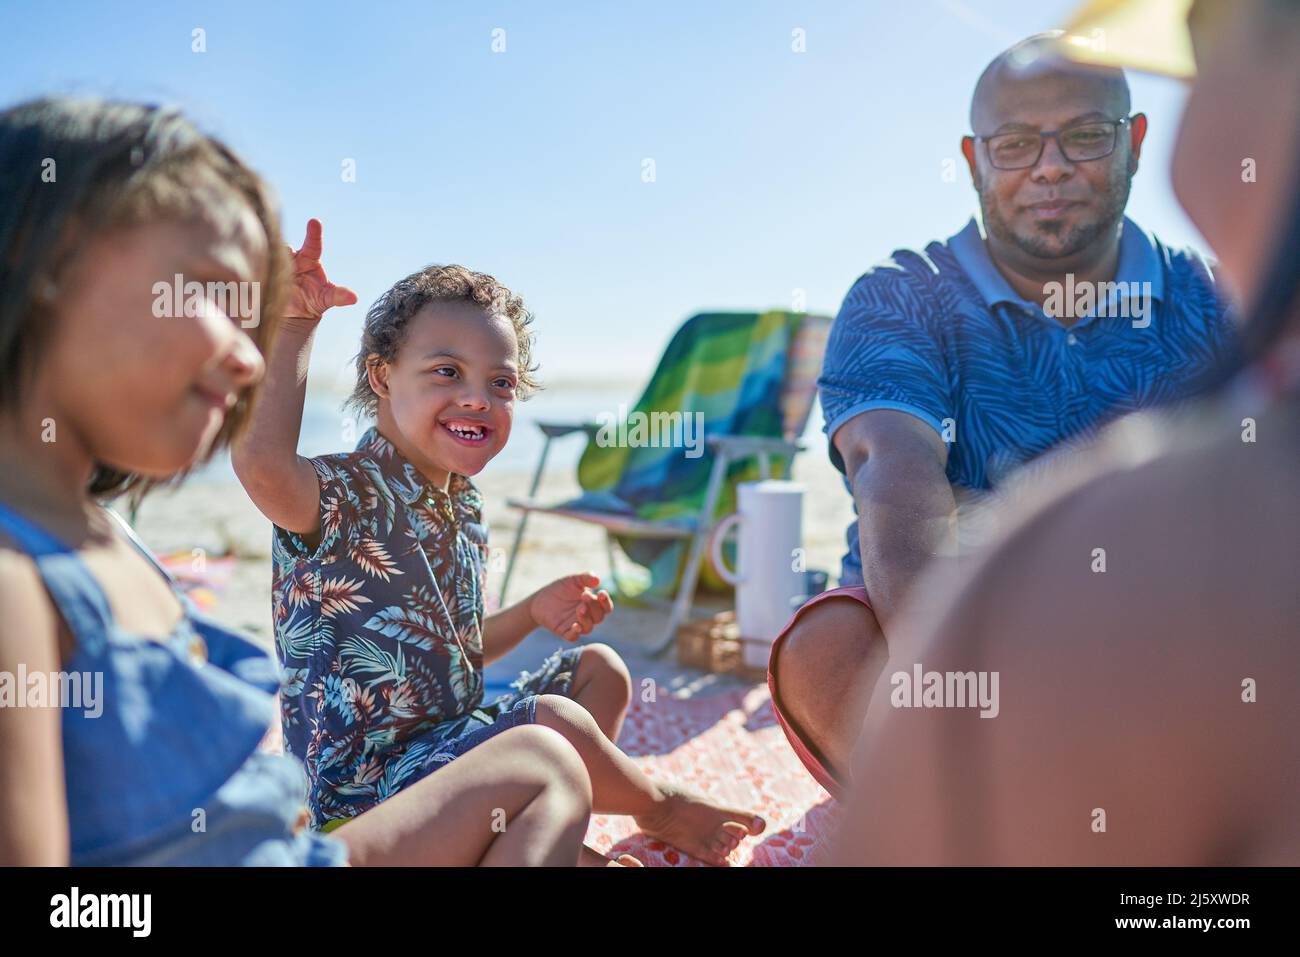 Happy boy with Down Syndrome at beach with family Stock Photo